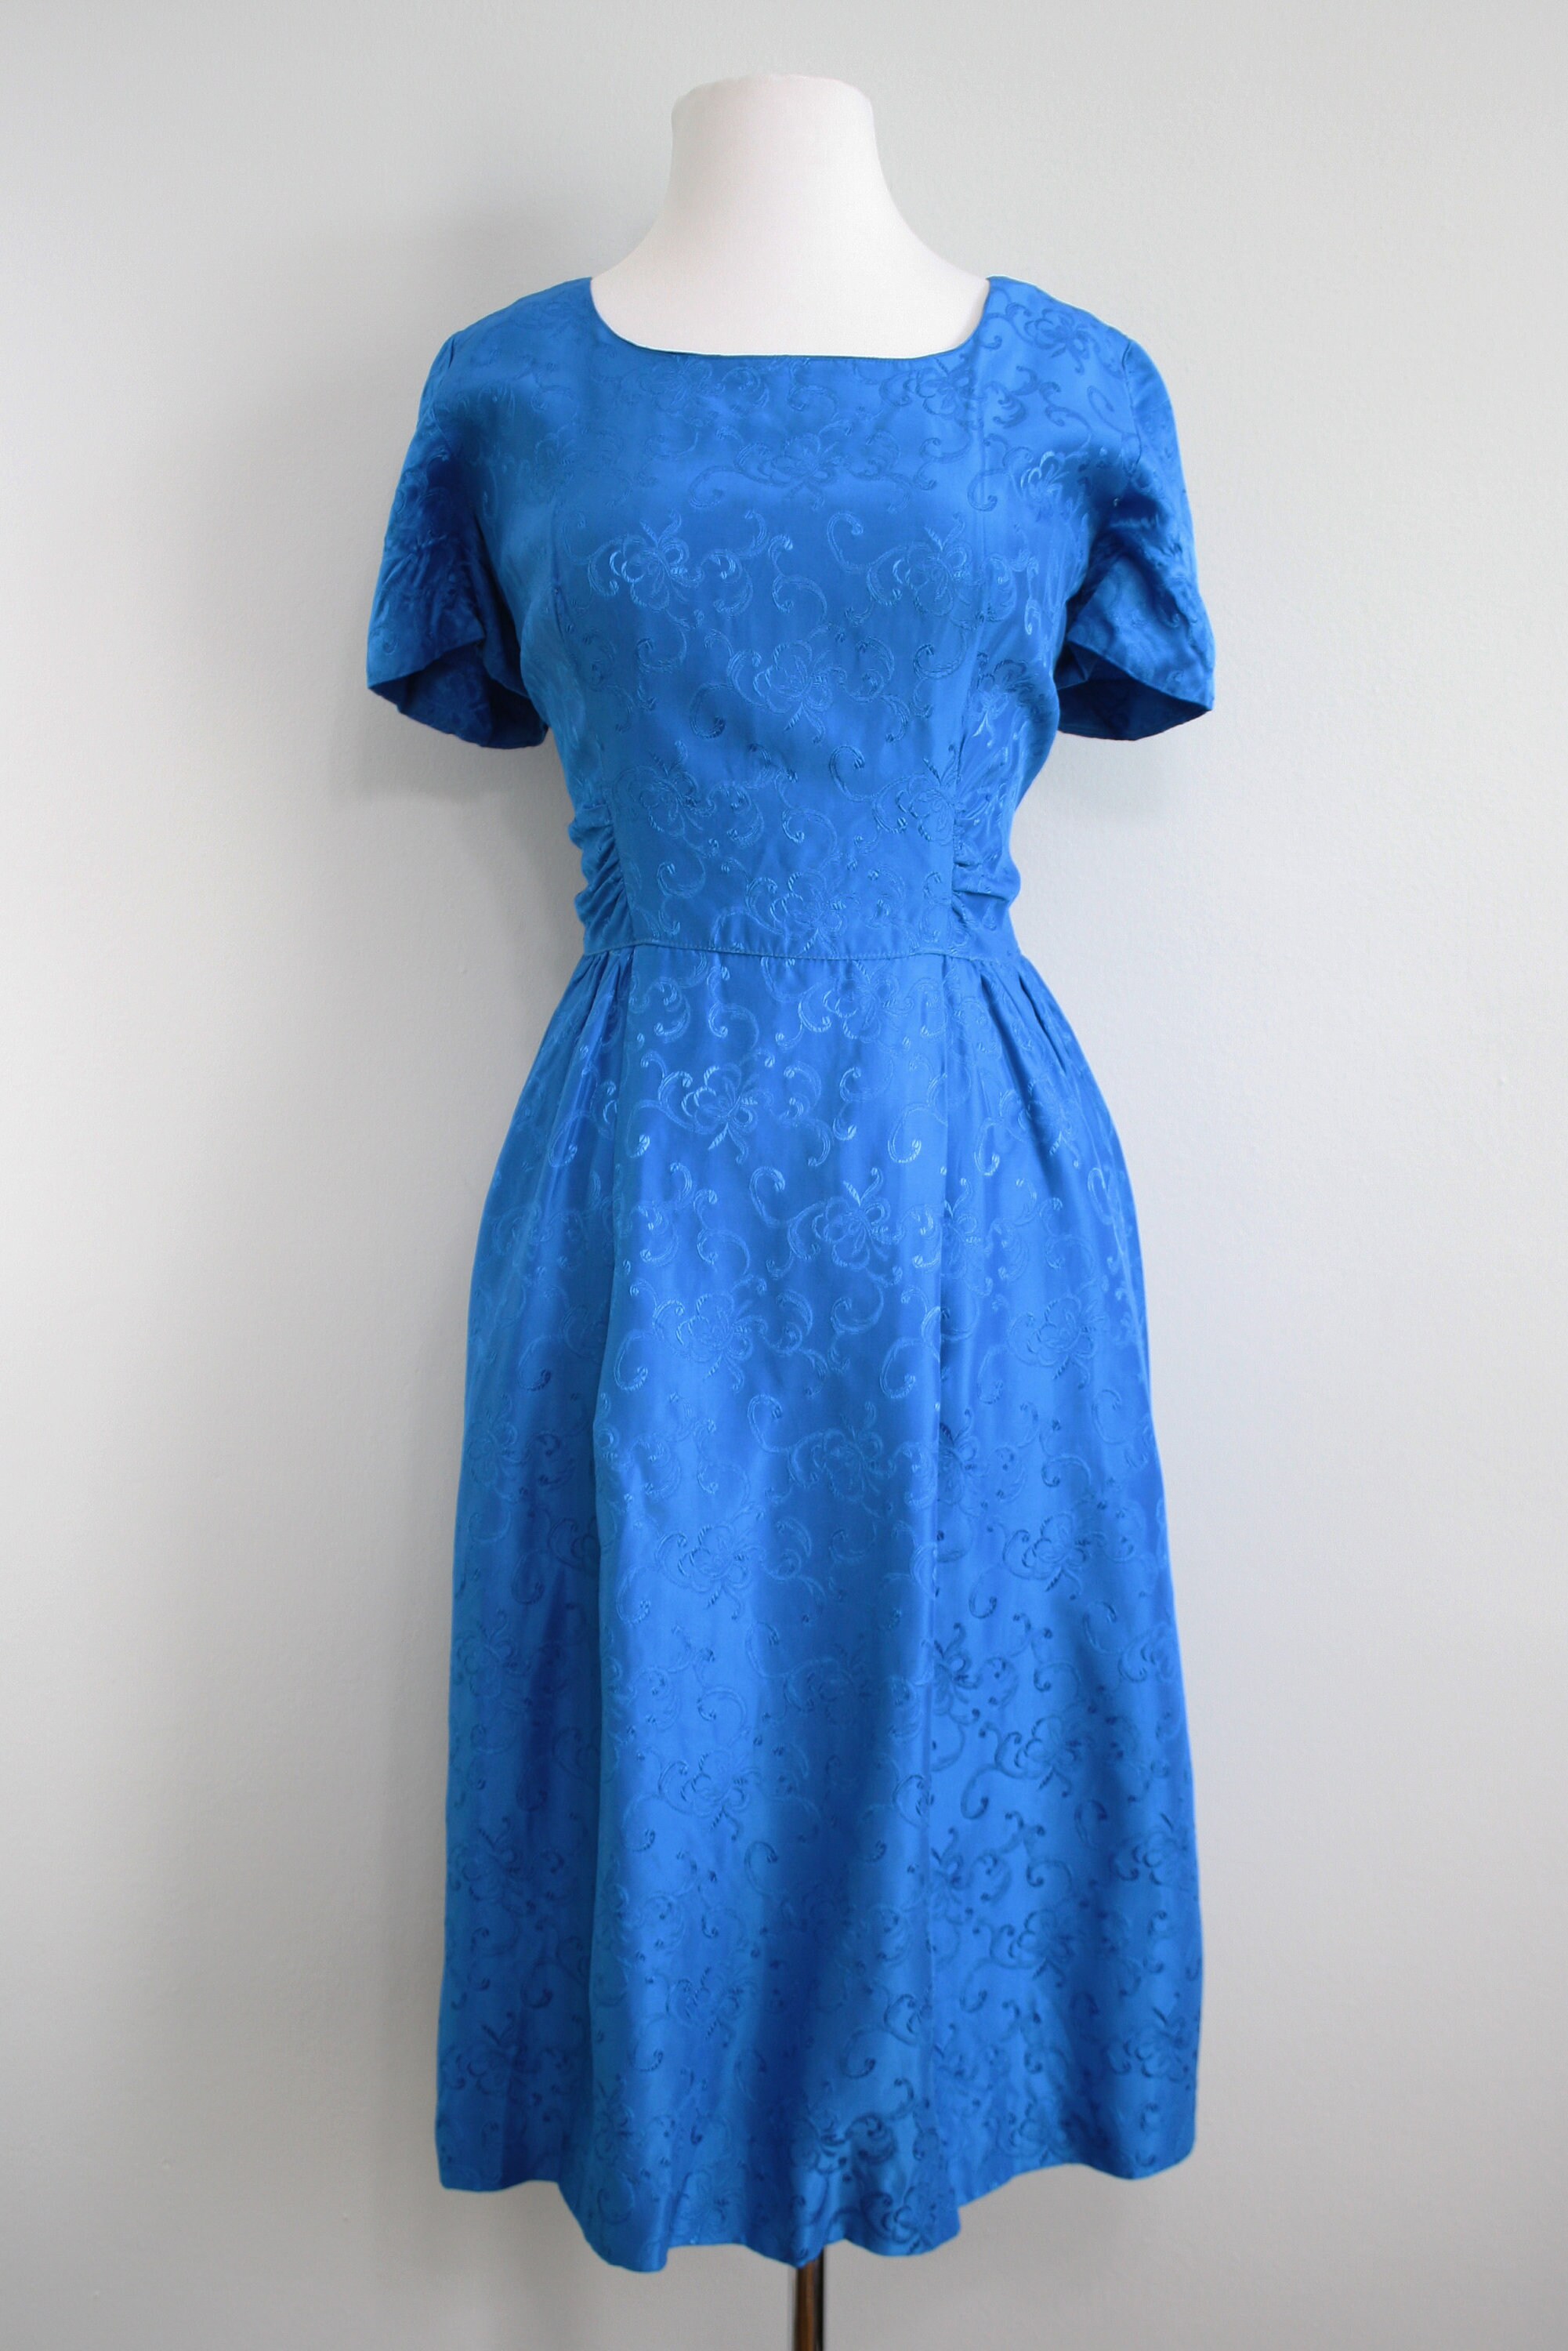 1960s Turquoise Brocade Cocktail Dress Medium to Large 60s - Etsy